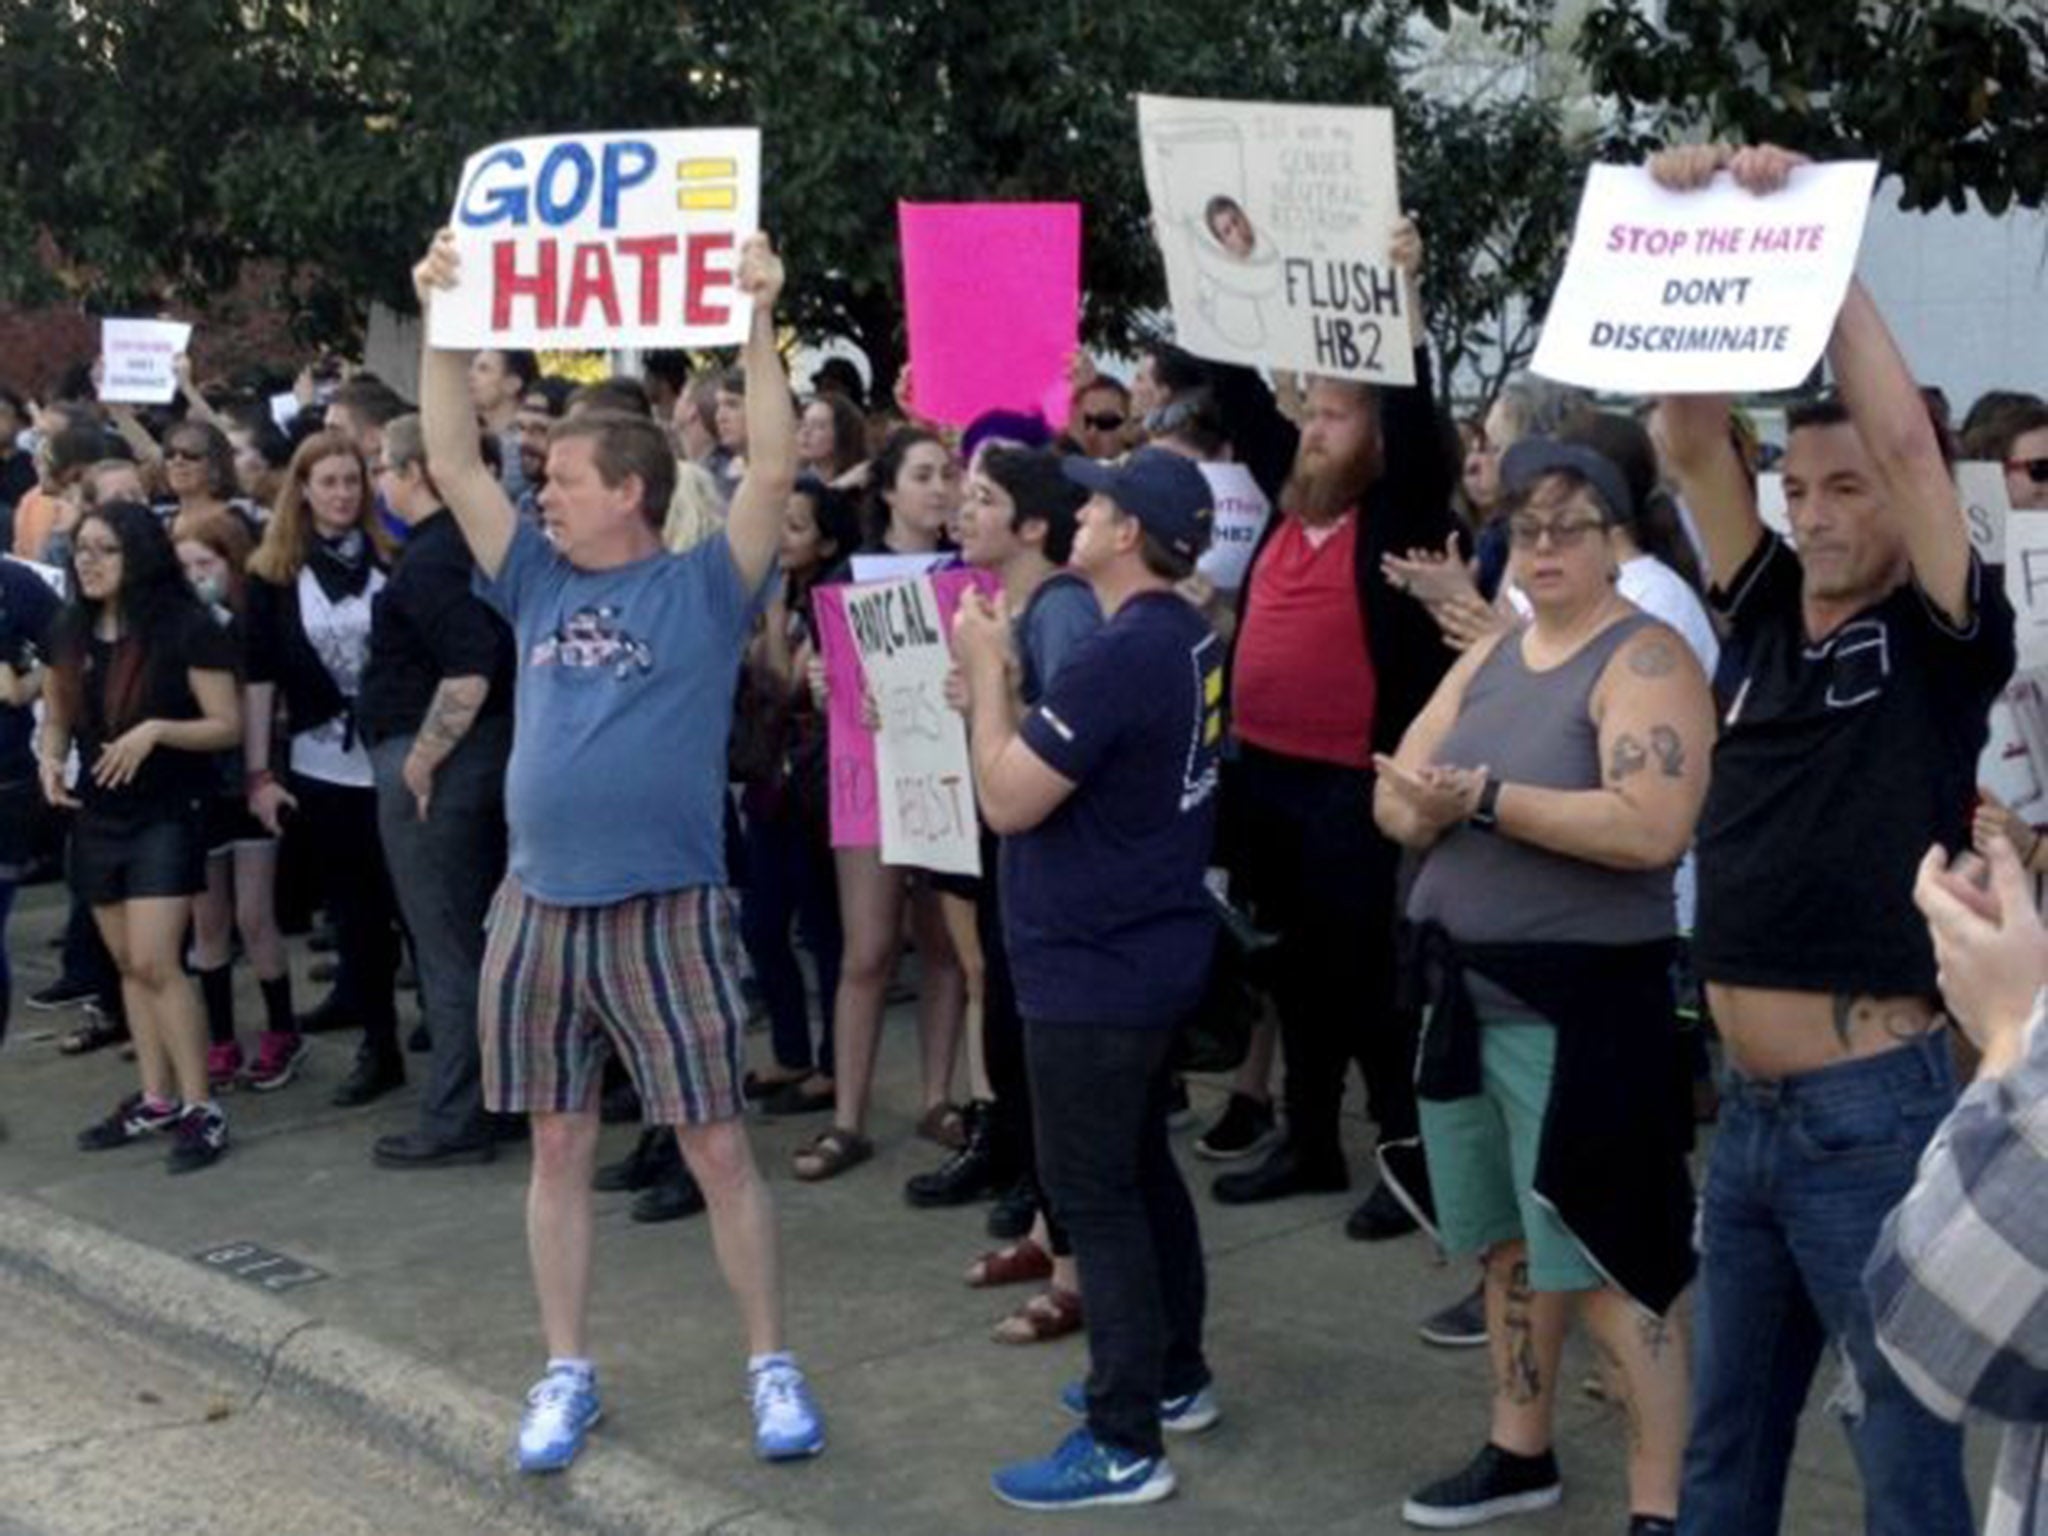 Protesters say North Carolina lawmakers are peddling policies of 'hate'